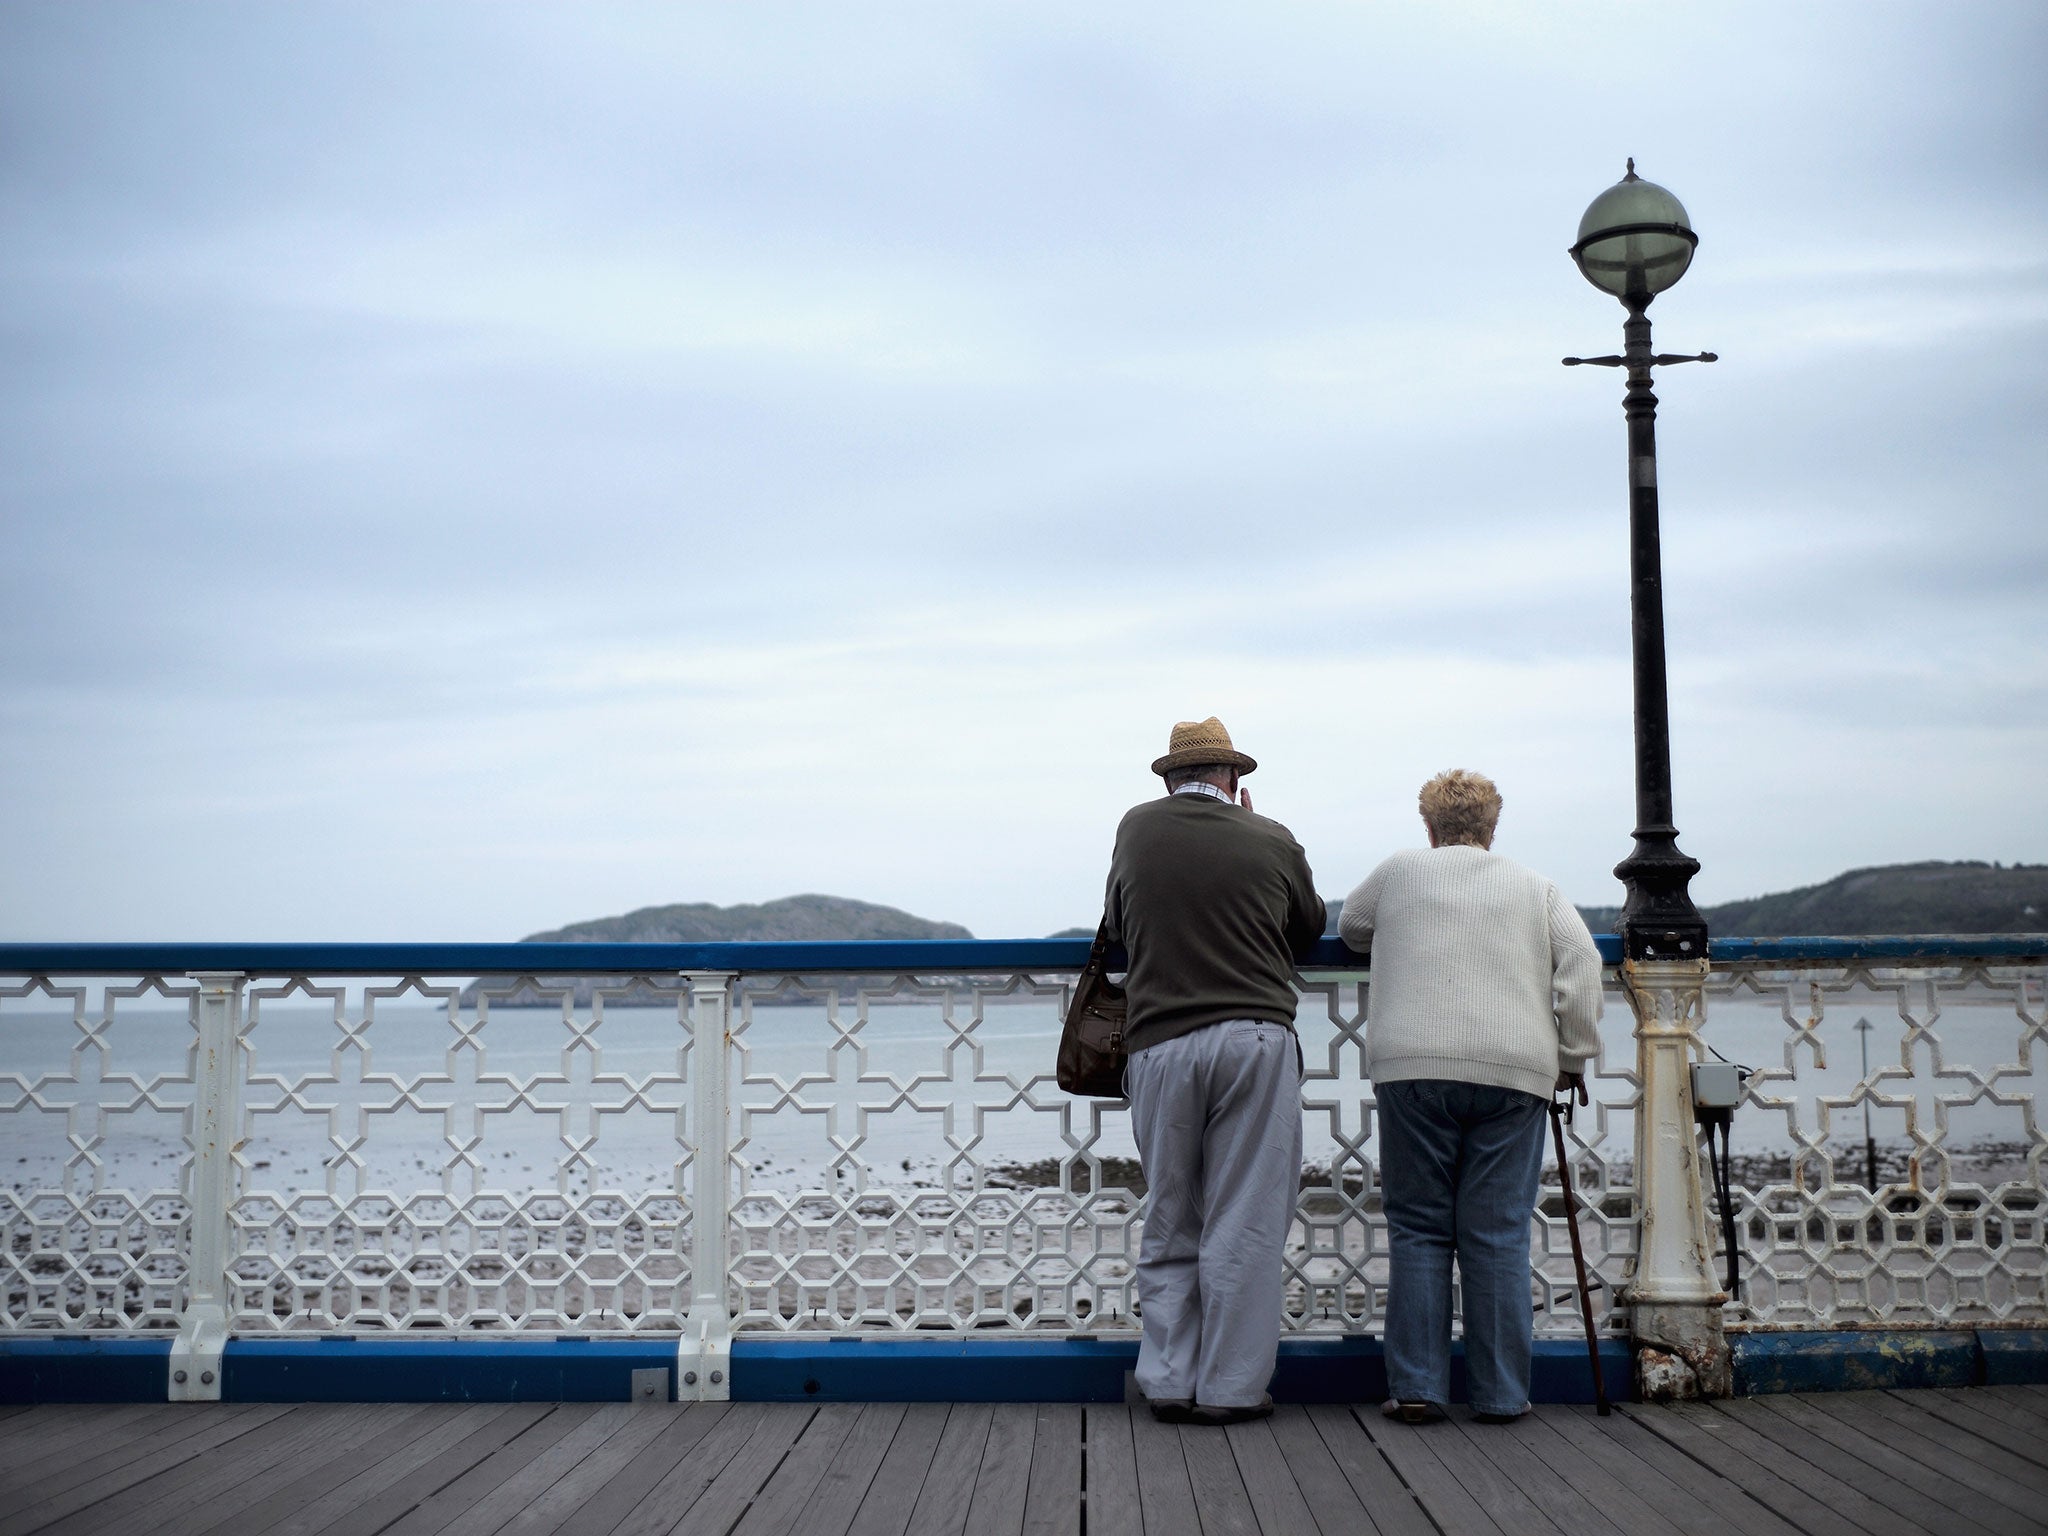 Older people have revealed how the world around them has changed in their lifetimes